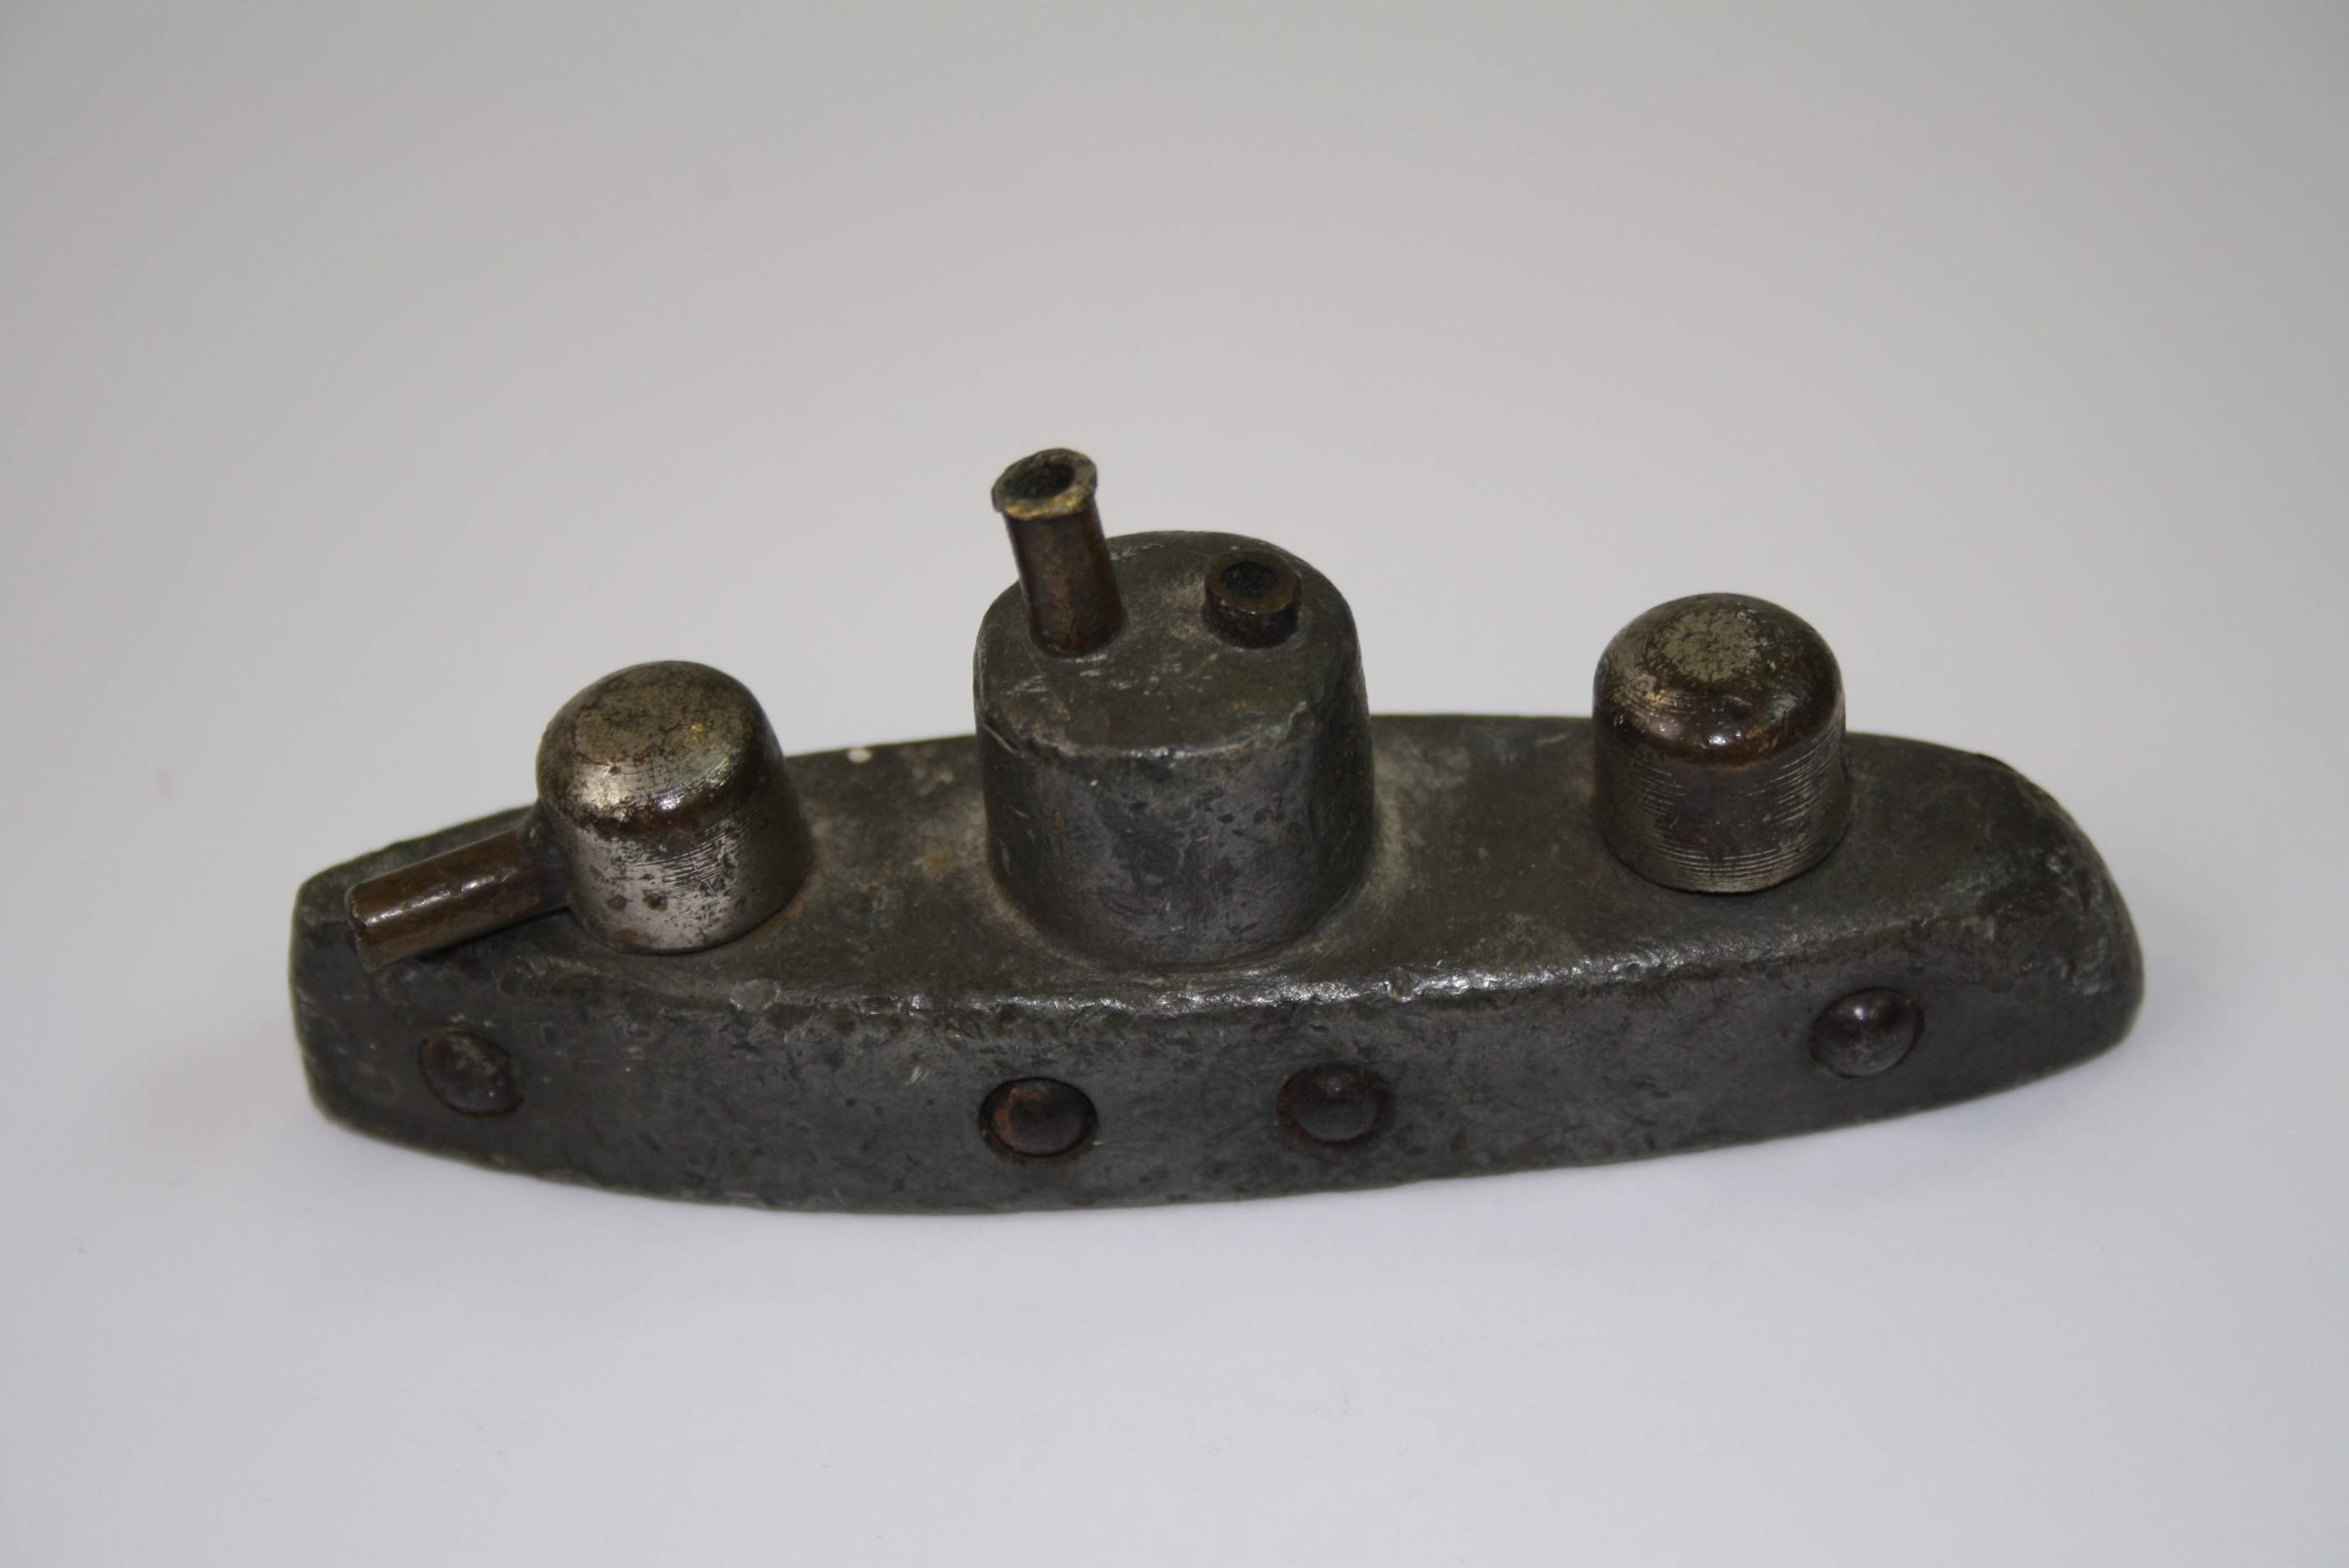 A Trench Art Lead Model Of A World War One U Boat / Submarine. - Image 2 of 4